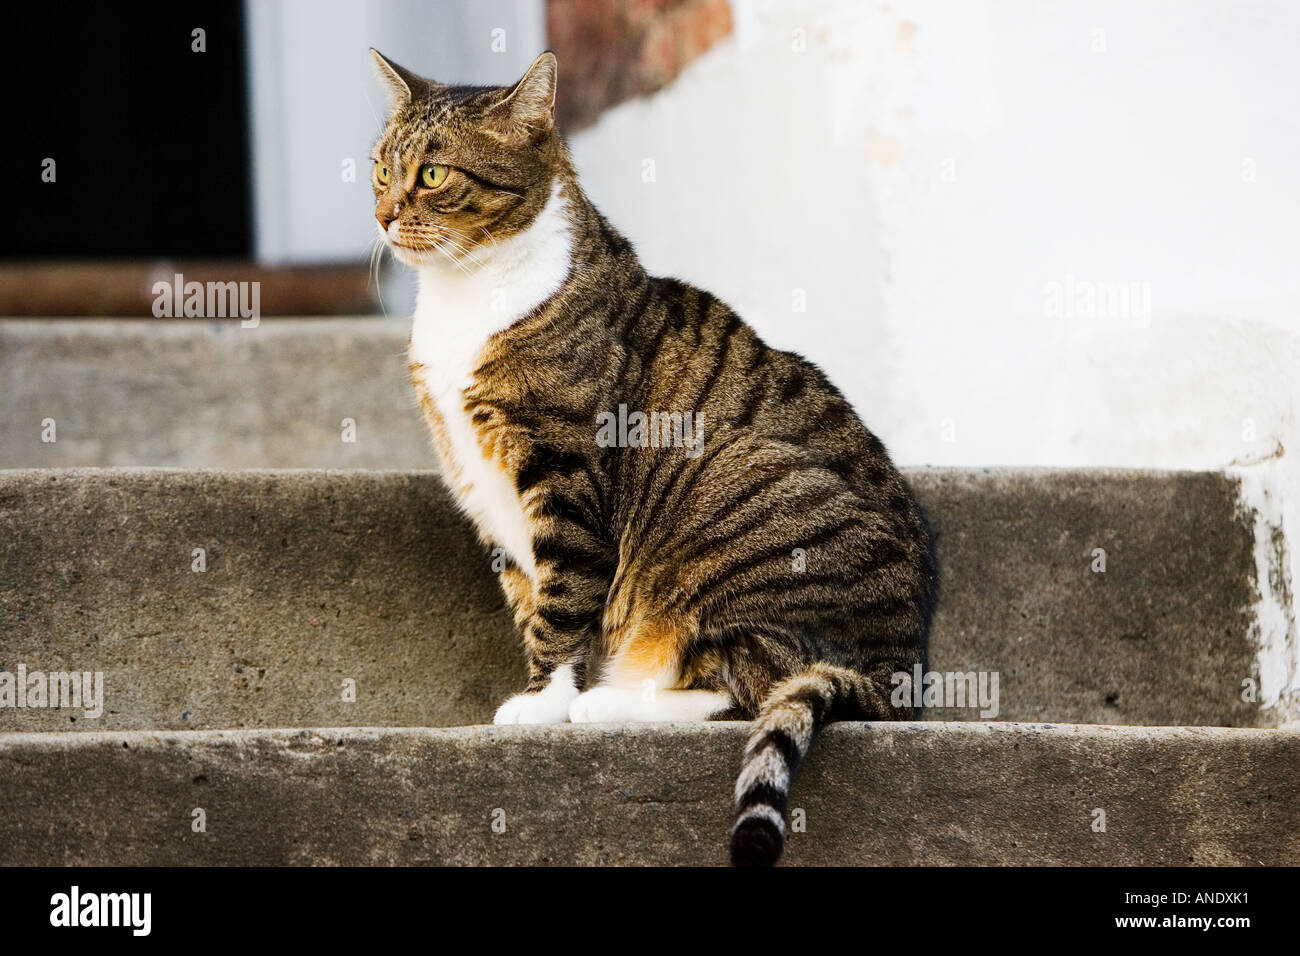 Tabby cat sits on a step Oxfordshire United Kingdom Stock Photo